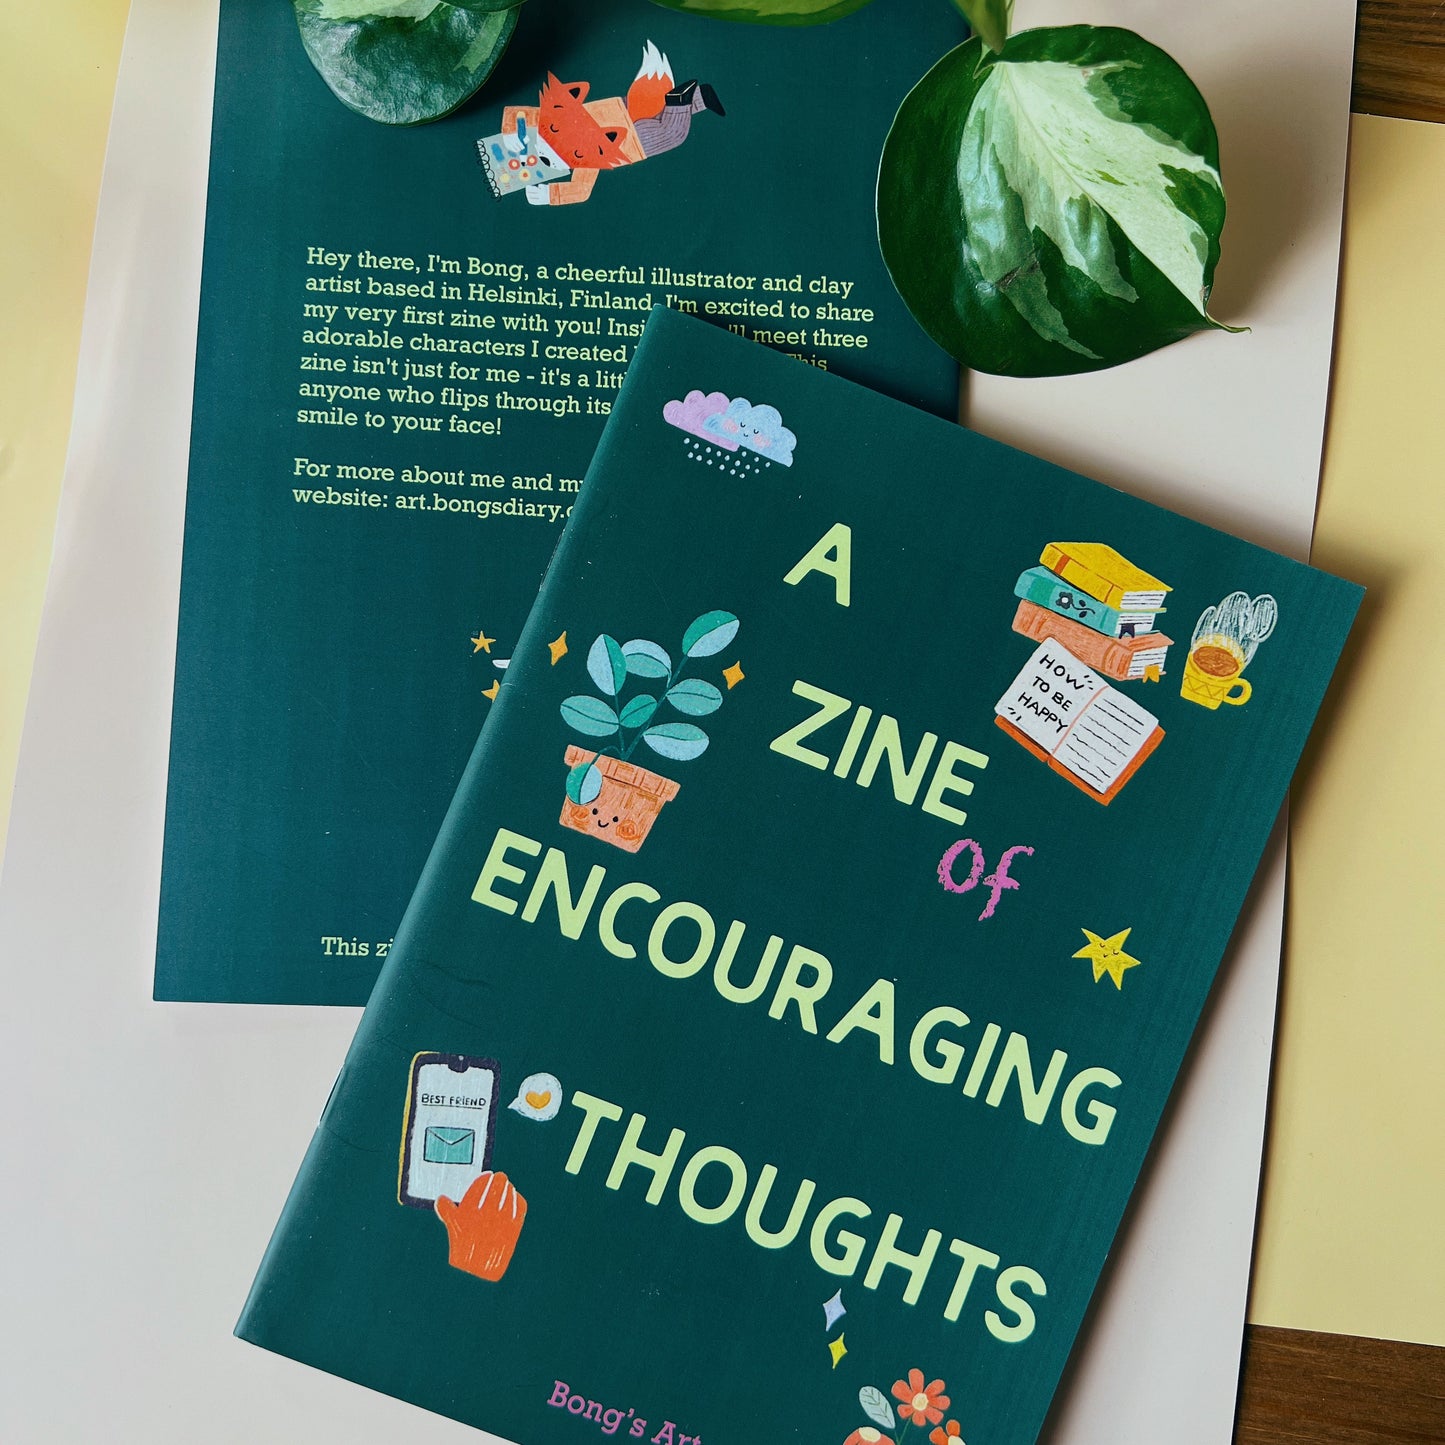 A Zine Encouraging Thoughts | Zine Book